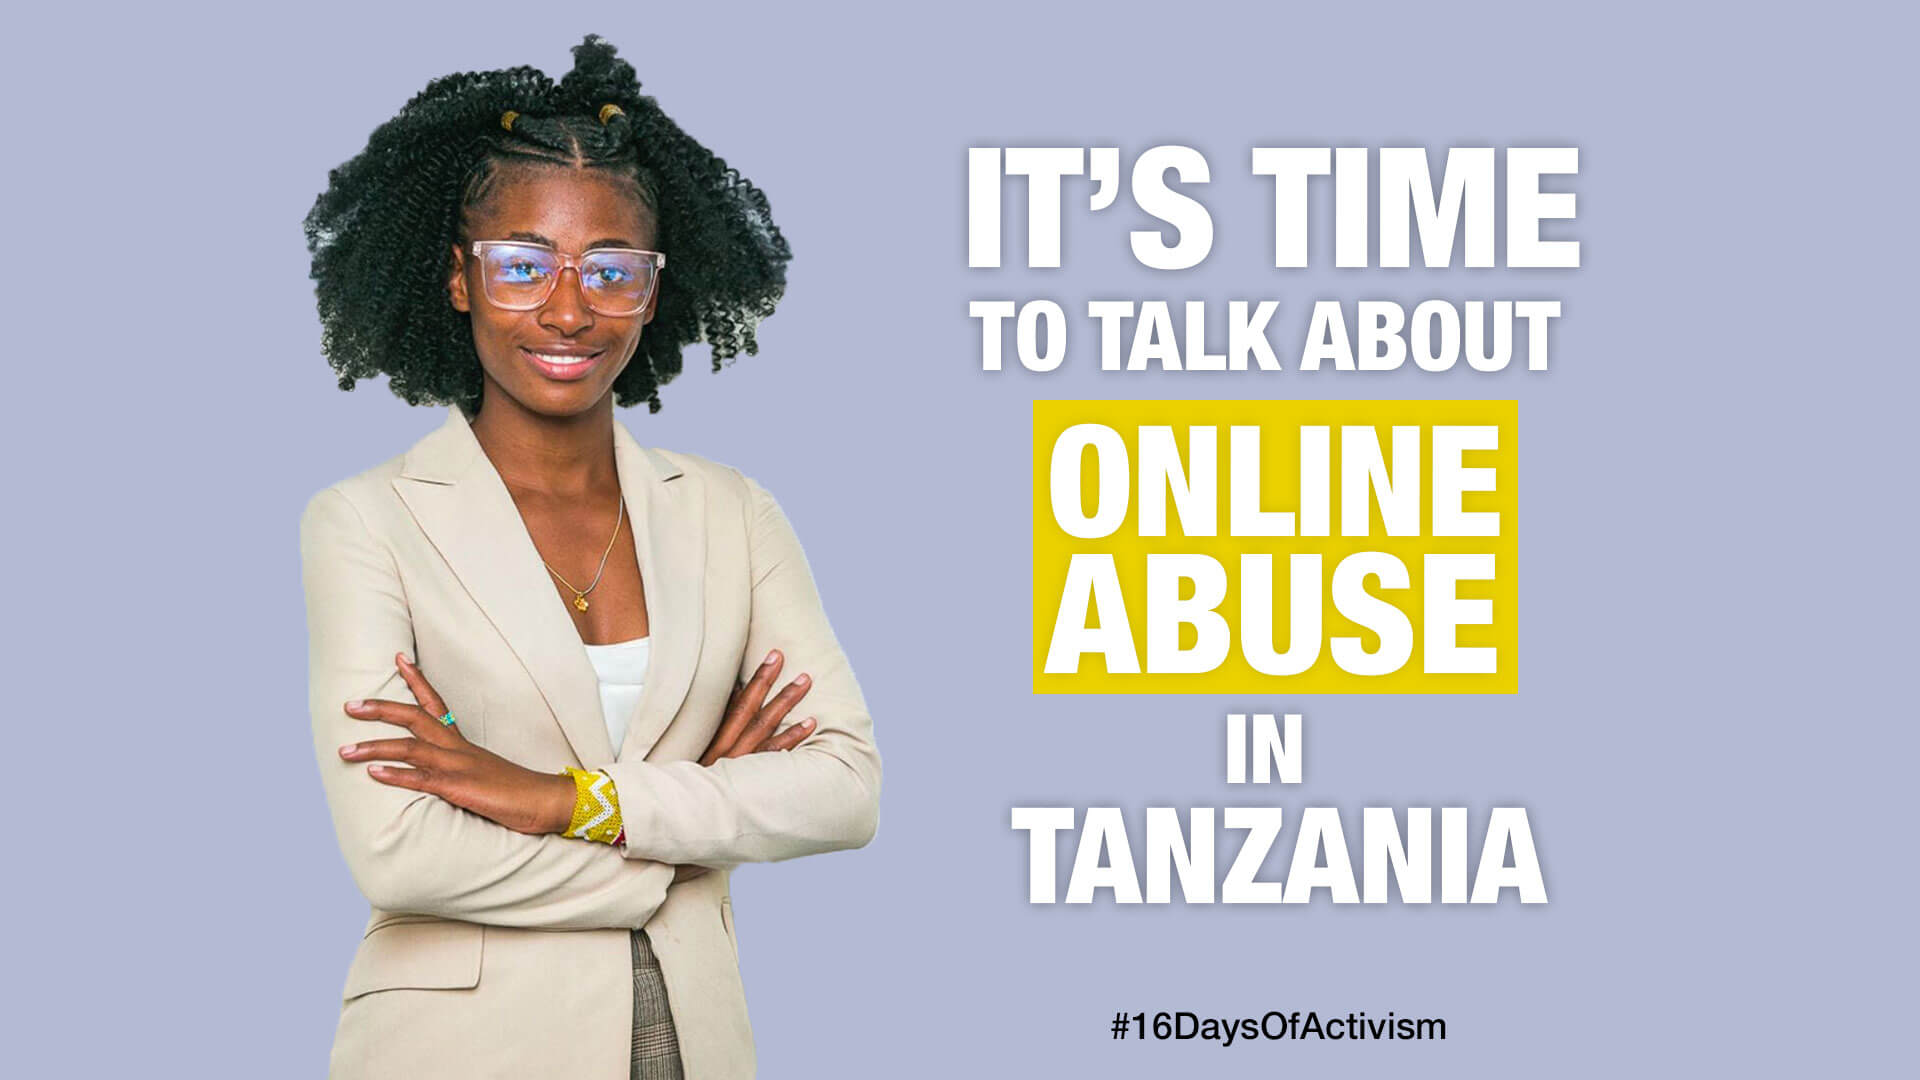 It’s time to talk about online abuse in Tanzania